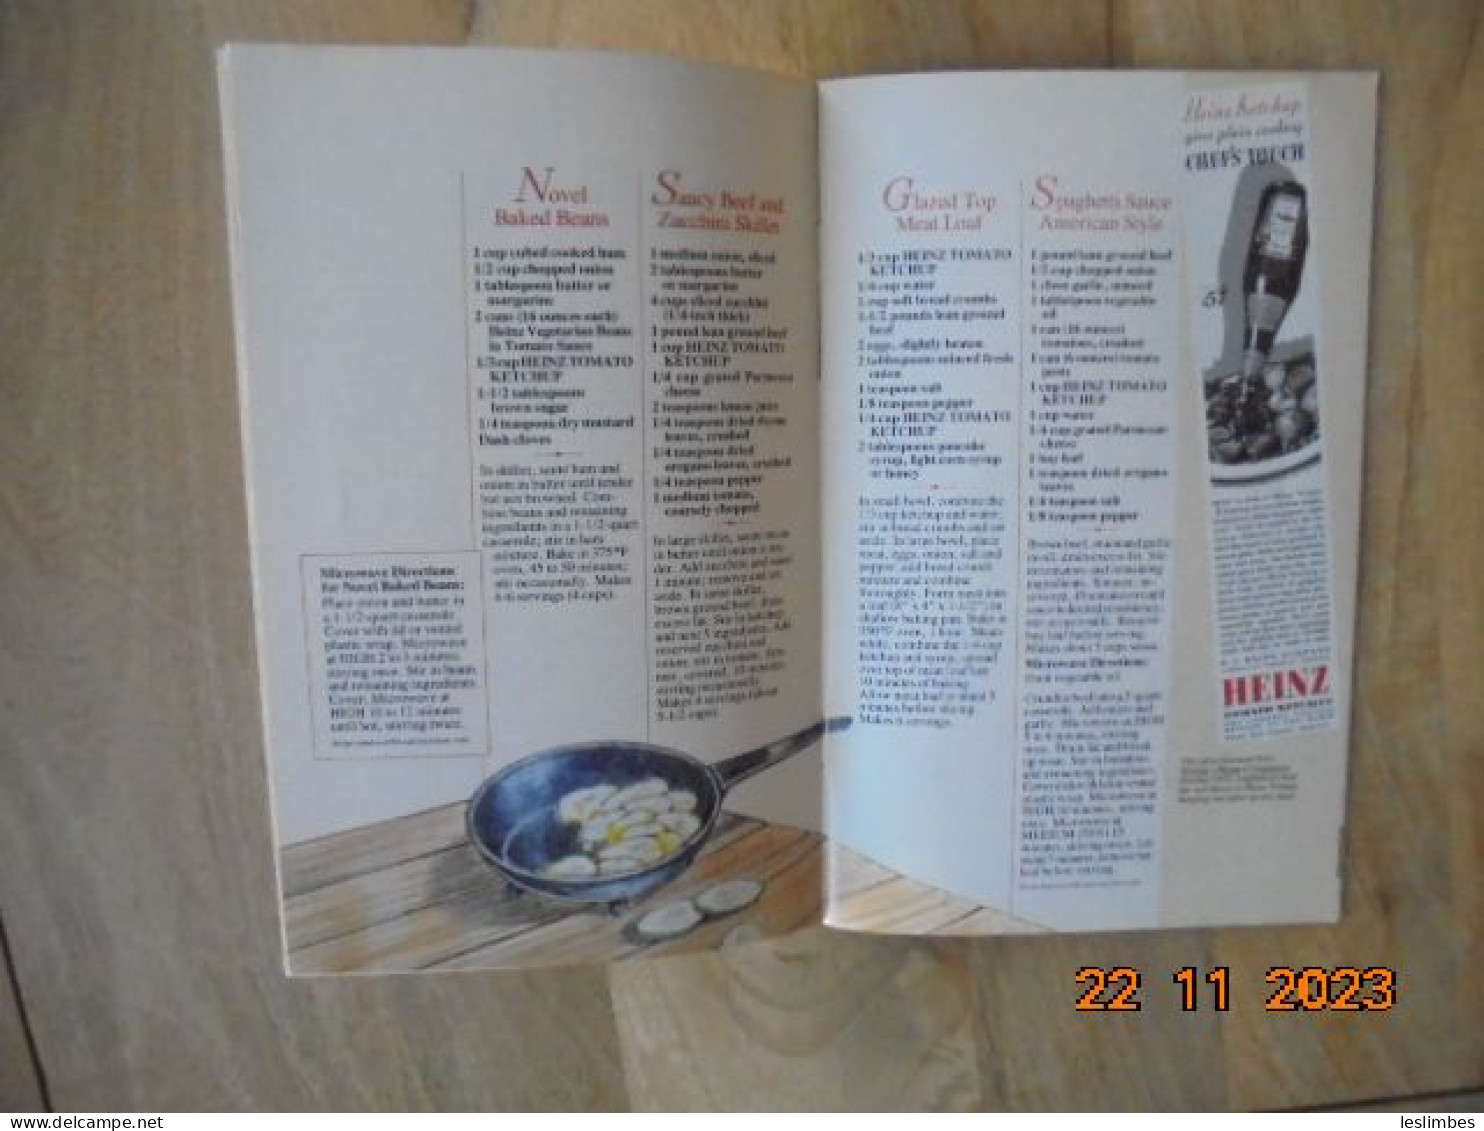 Ketchup Recipe Collection - H.J. Heinz Co. 1988 - American (US)